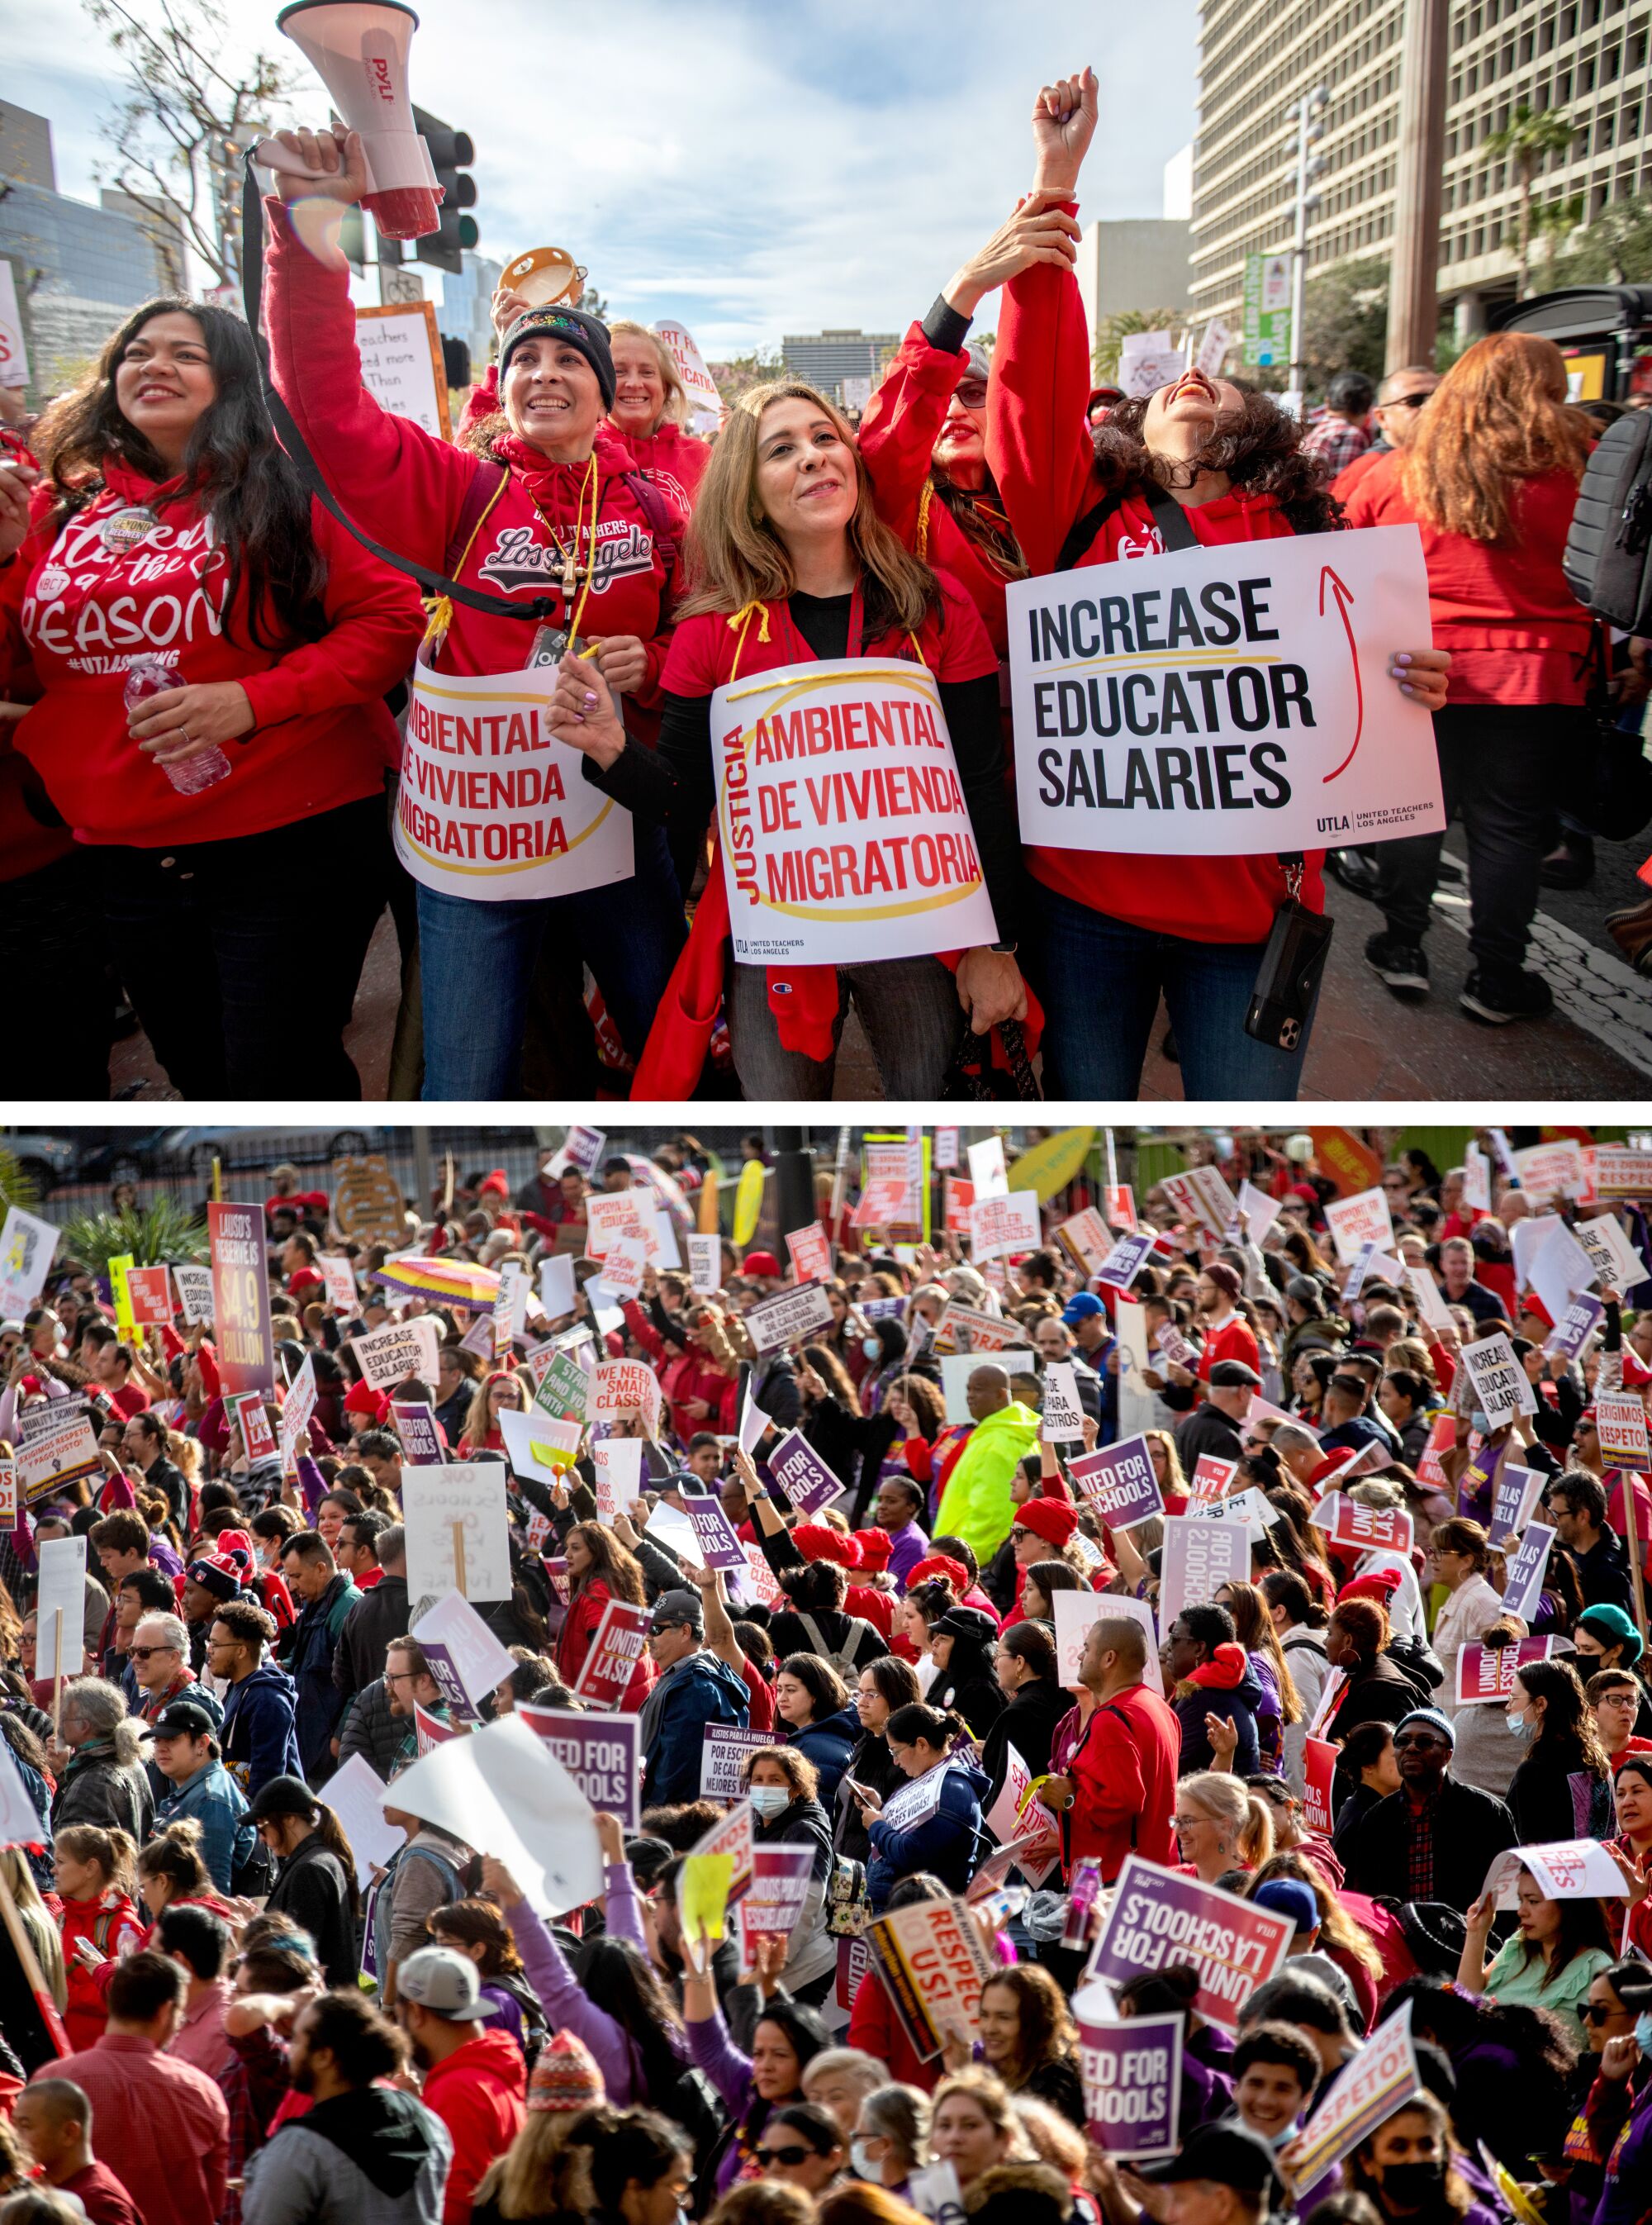 A vertical diptych depicting, at the top, people dressed mostly in red at a gathering, and at the bottom, a wide view of a crowd. 